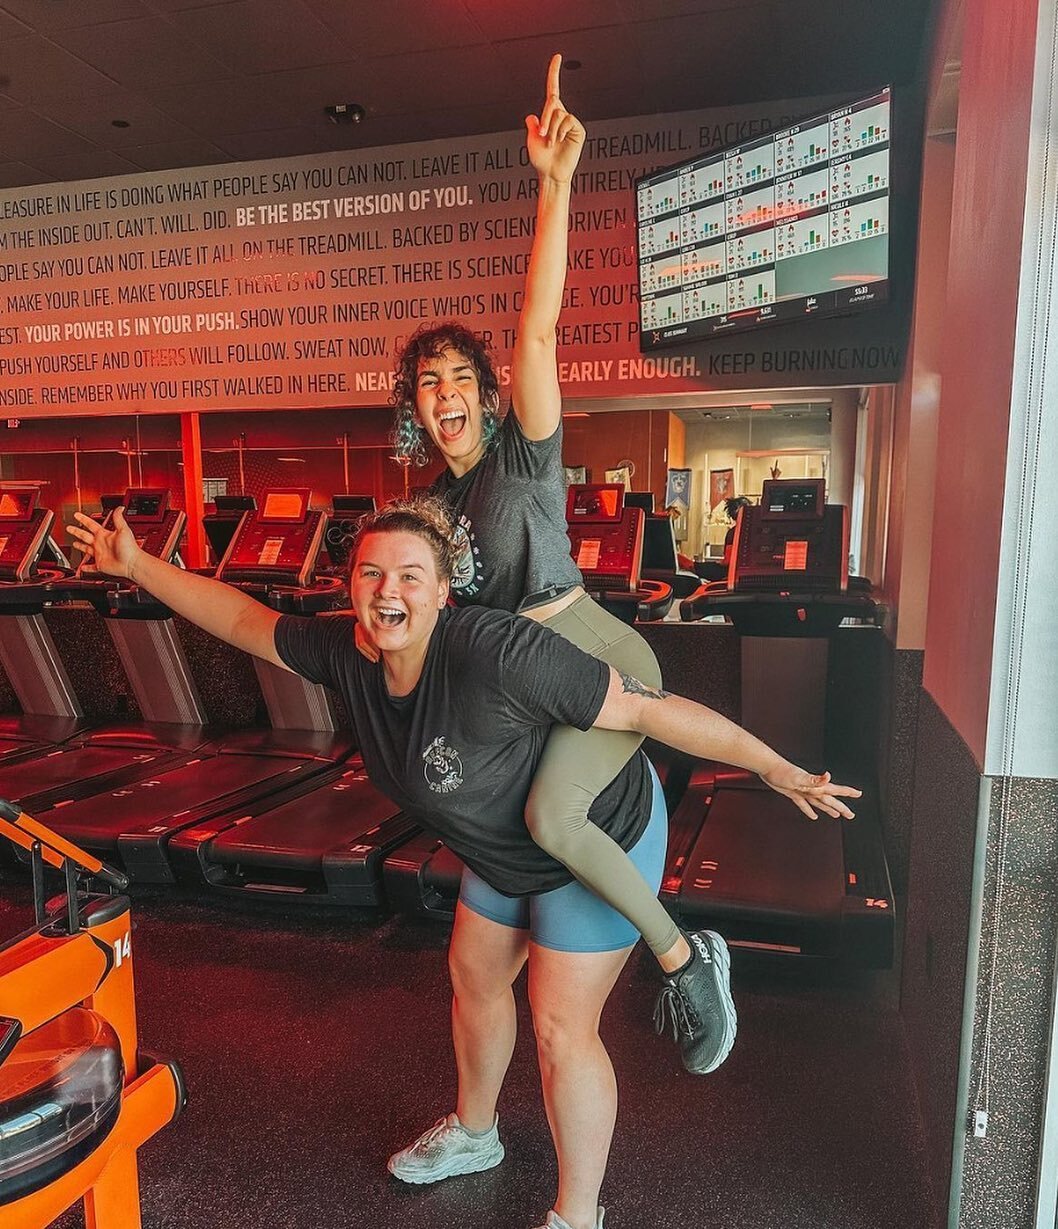 The post-workout class celebration feels so good! Get your first class free at @orangetheorylakeway 🍊💪
.
.
.
@oaksatlakeway @orangetheorylakeway #health #motivation #workout #workoutclass #healthyliving #orangetheory #sweat #atx #austin #fitness #5